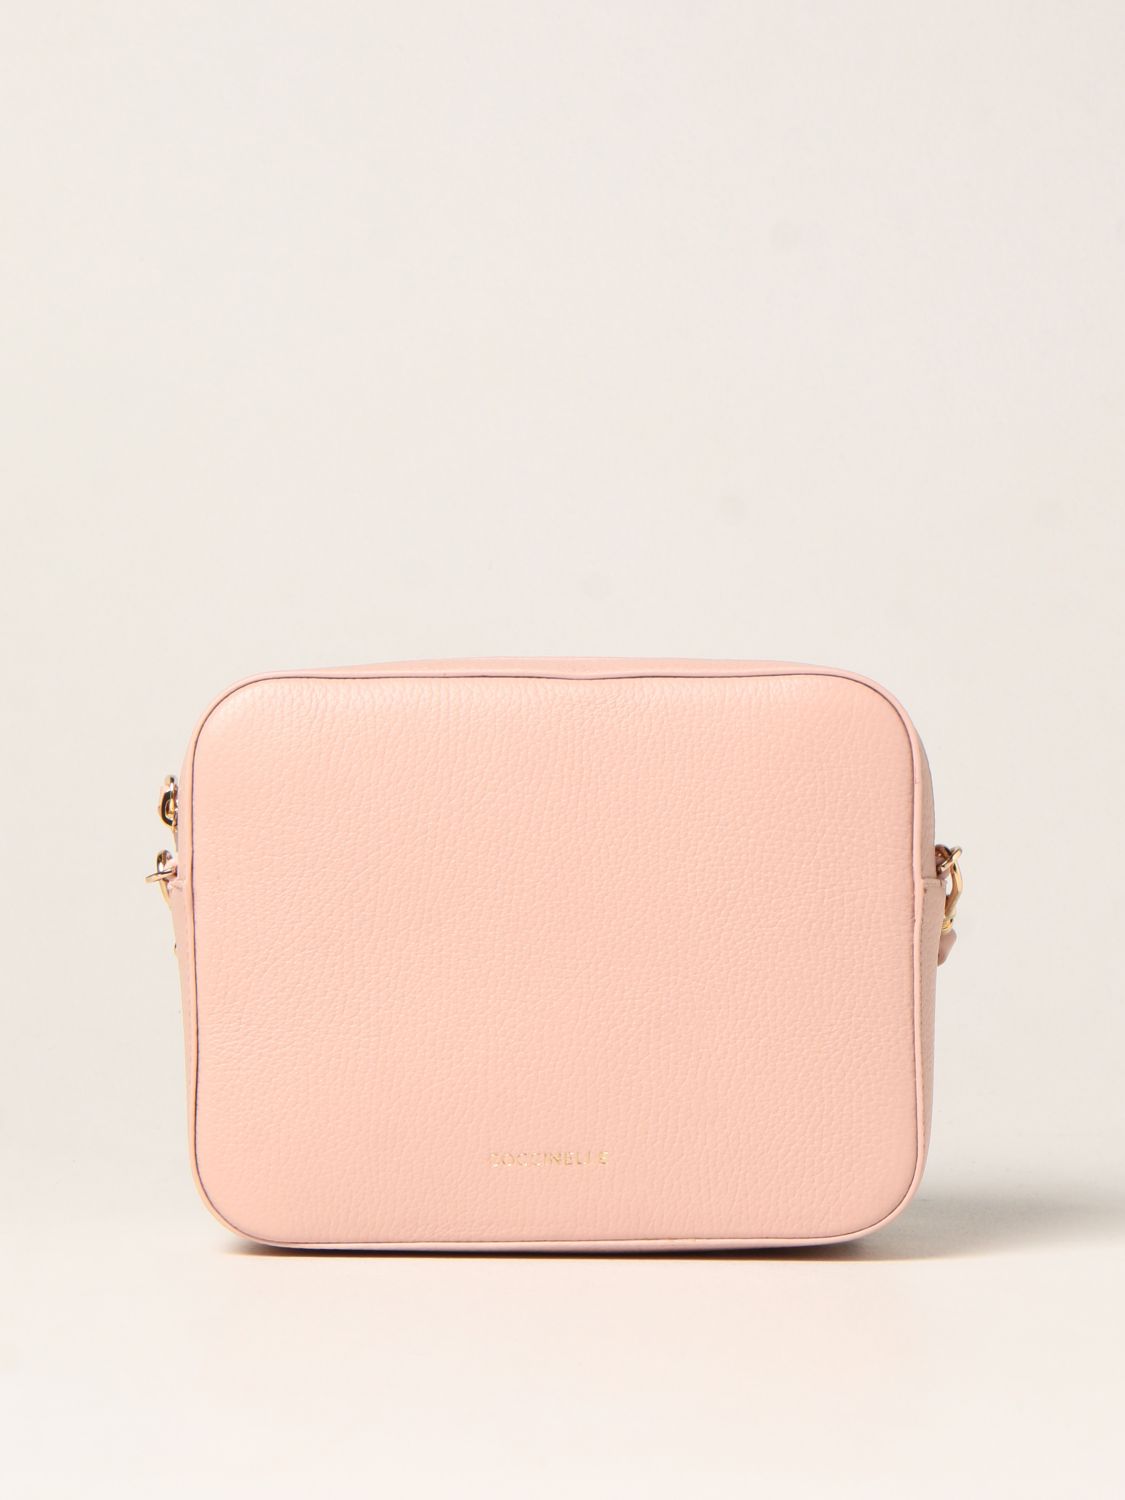 COCCINELLE: Tebe bag in grained leather - Pink | Coccinelle crossbody ...